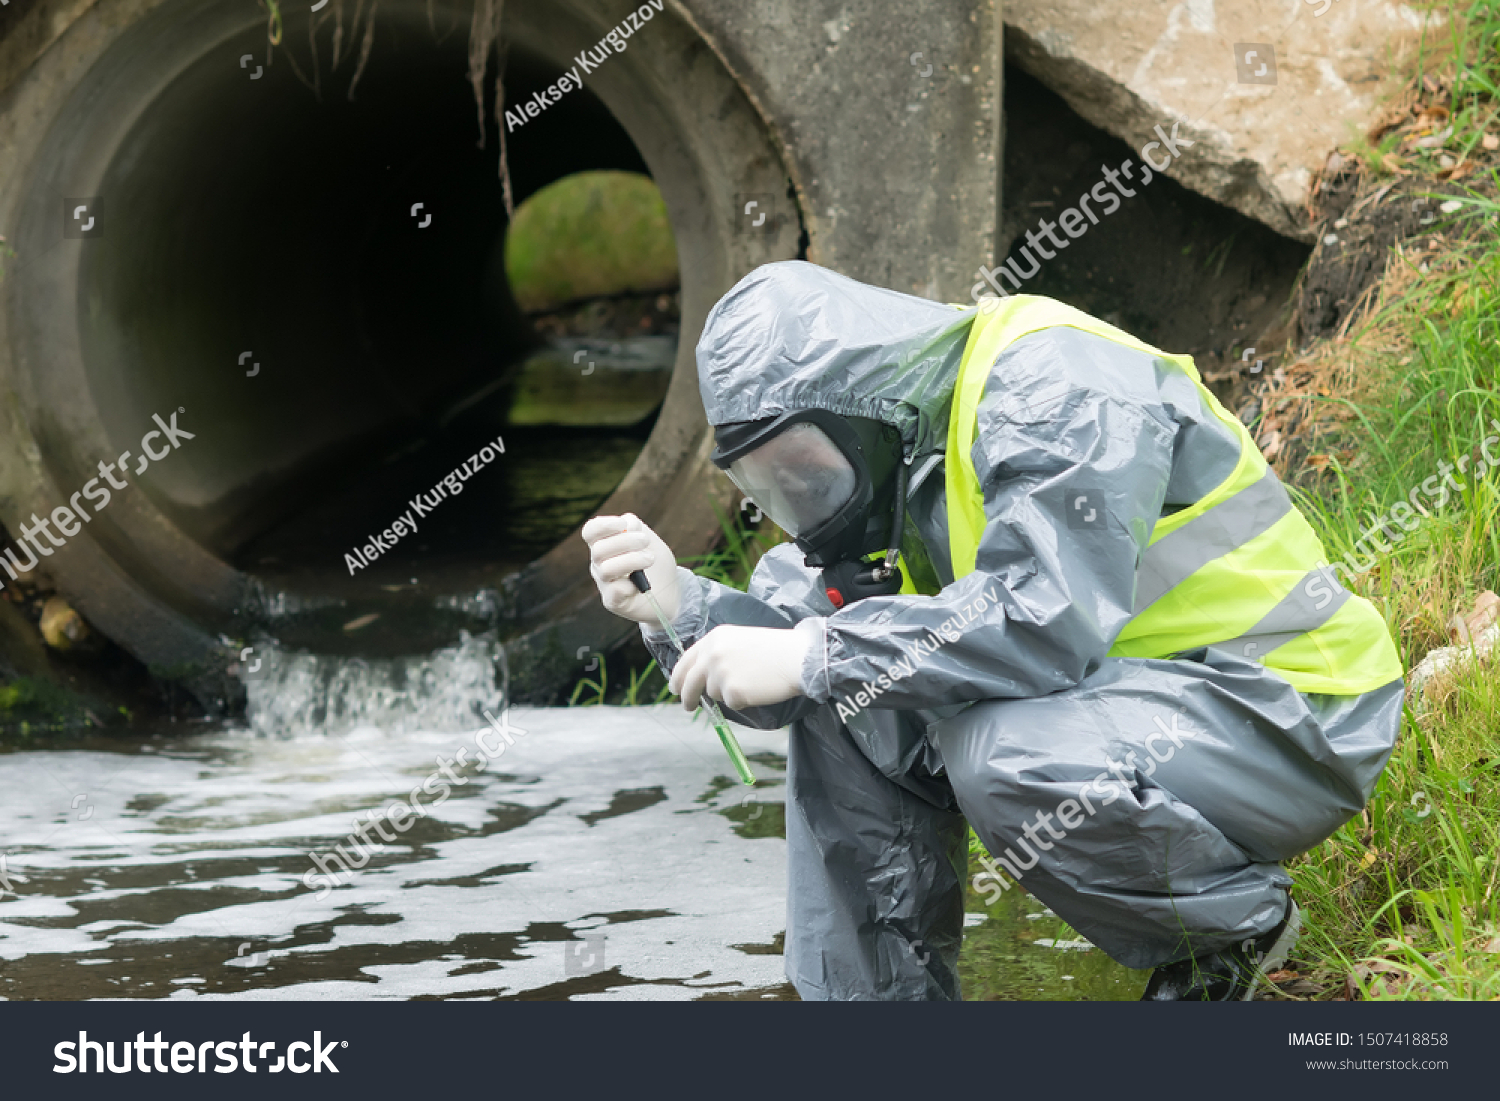 a man in a protective suit takes a sample of water from the river after the release of chemical waste #1507418858